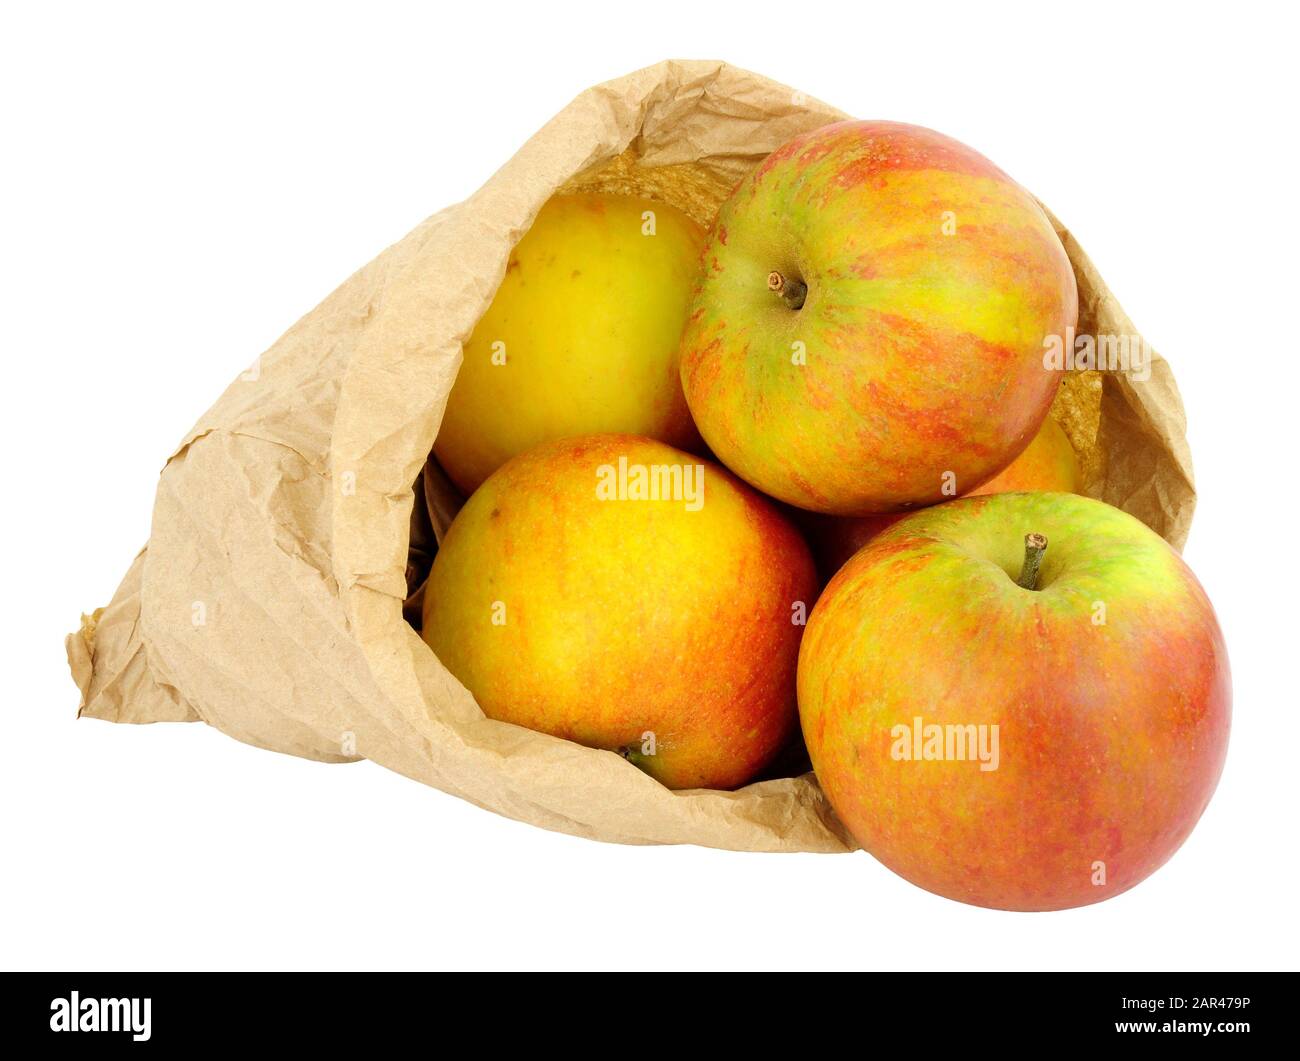 Fresh apples in an environmentally friendly brown paper bag isolated on a white background Stock Photo